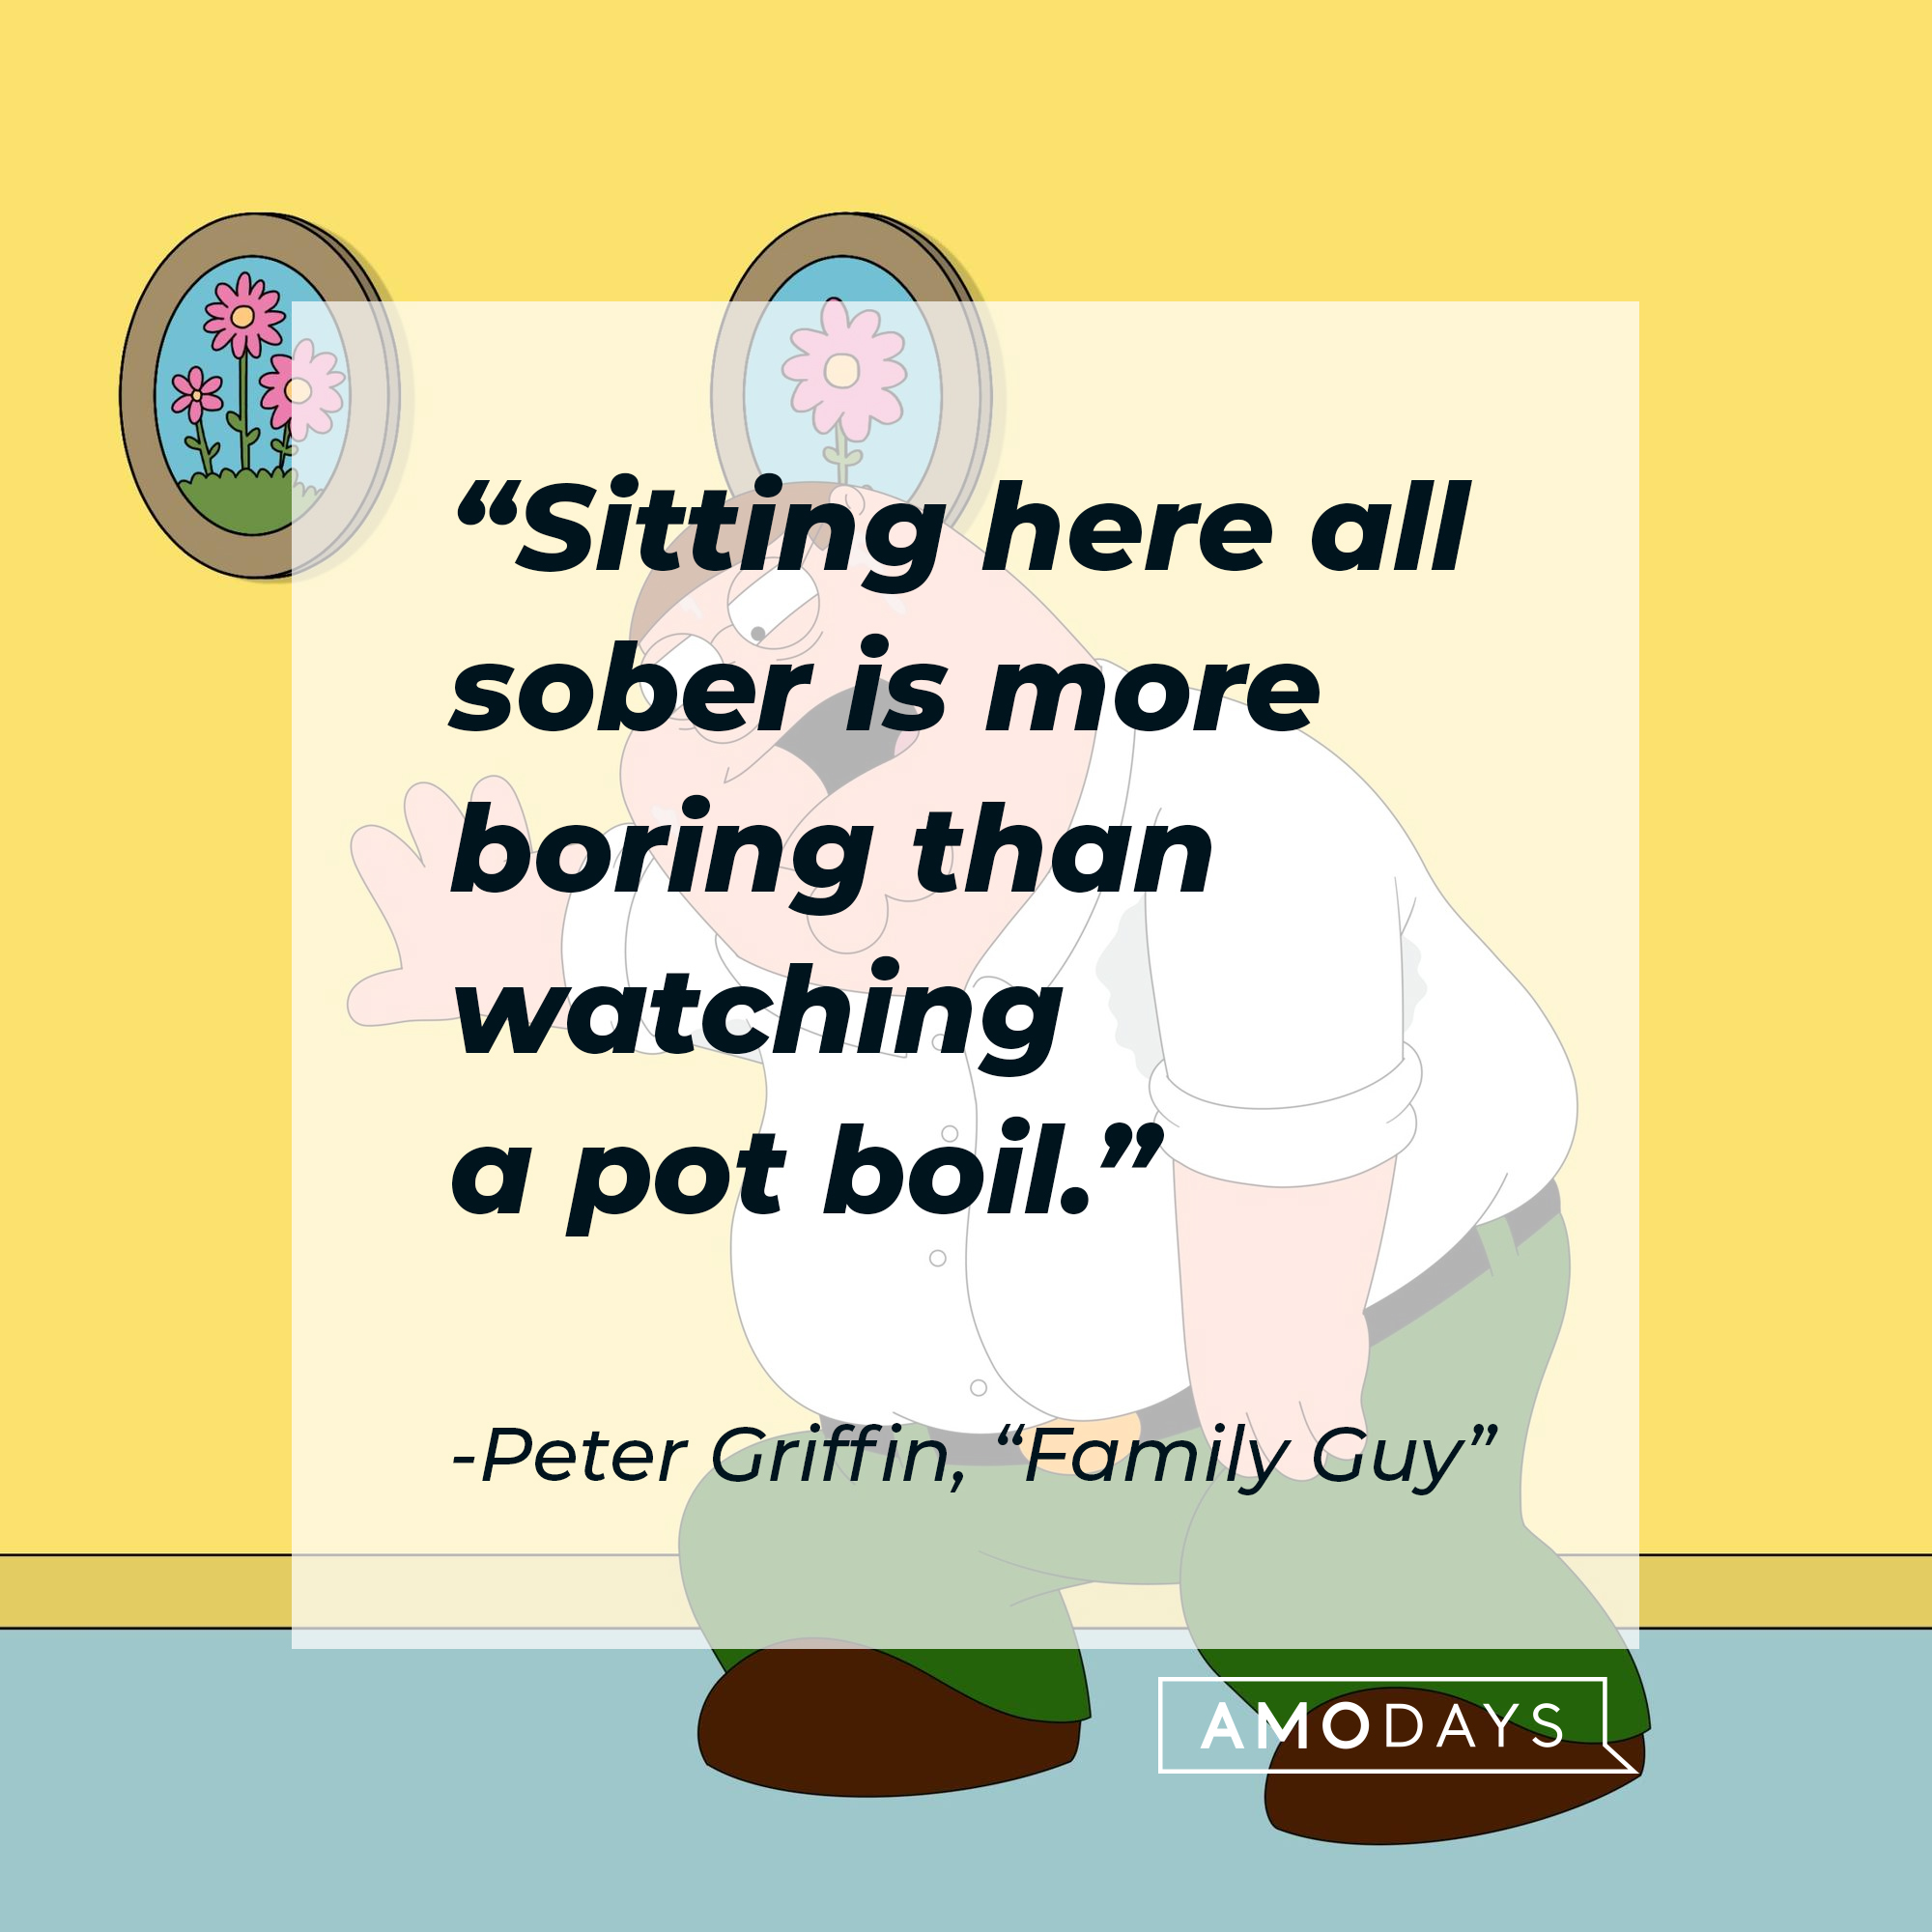 Peter Griffin's quote: "Sitting here all sober is more boring than watching a pot boil." | Source: facebook.com/FamilyGuy